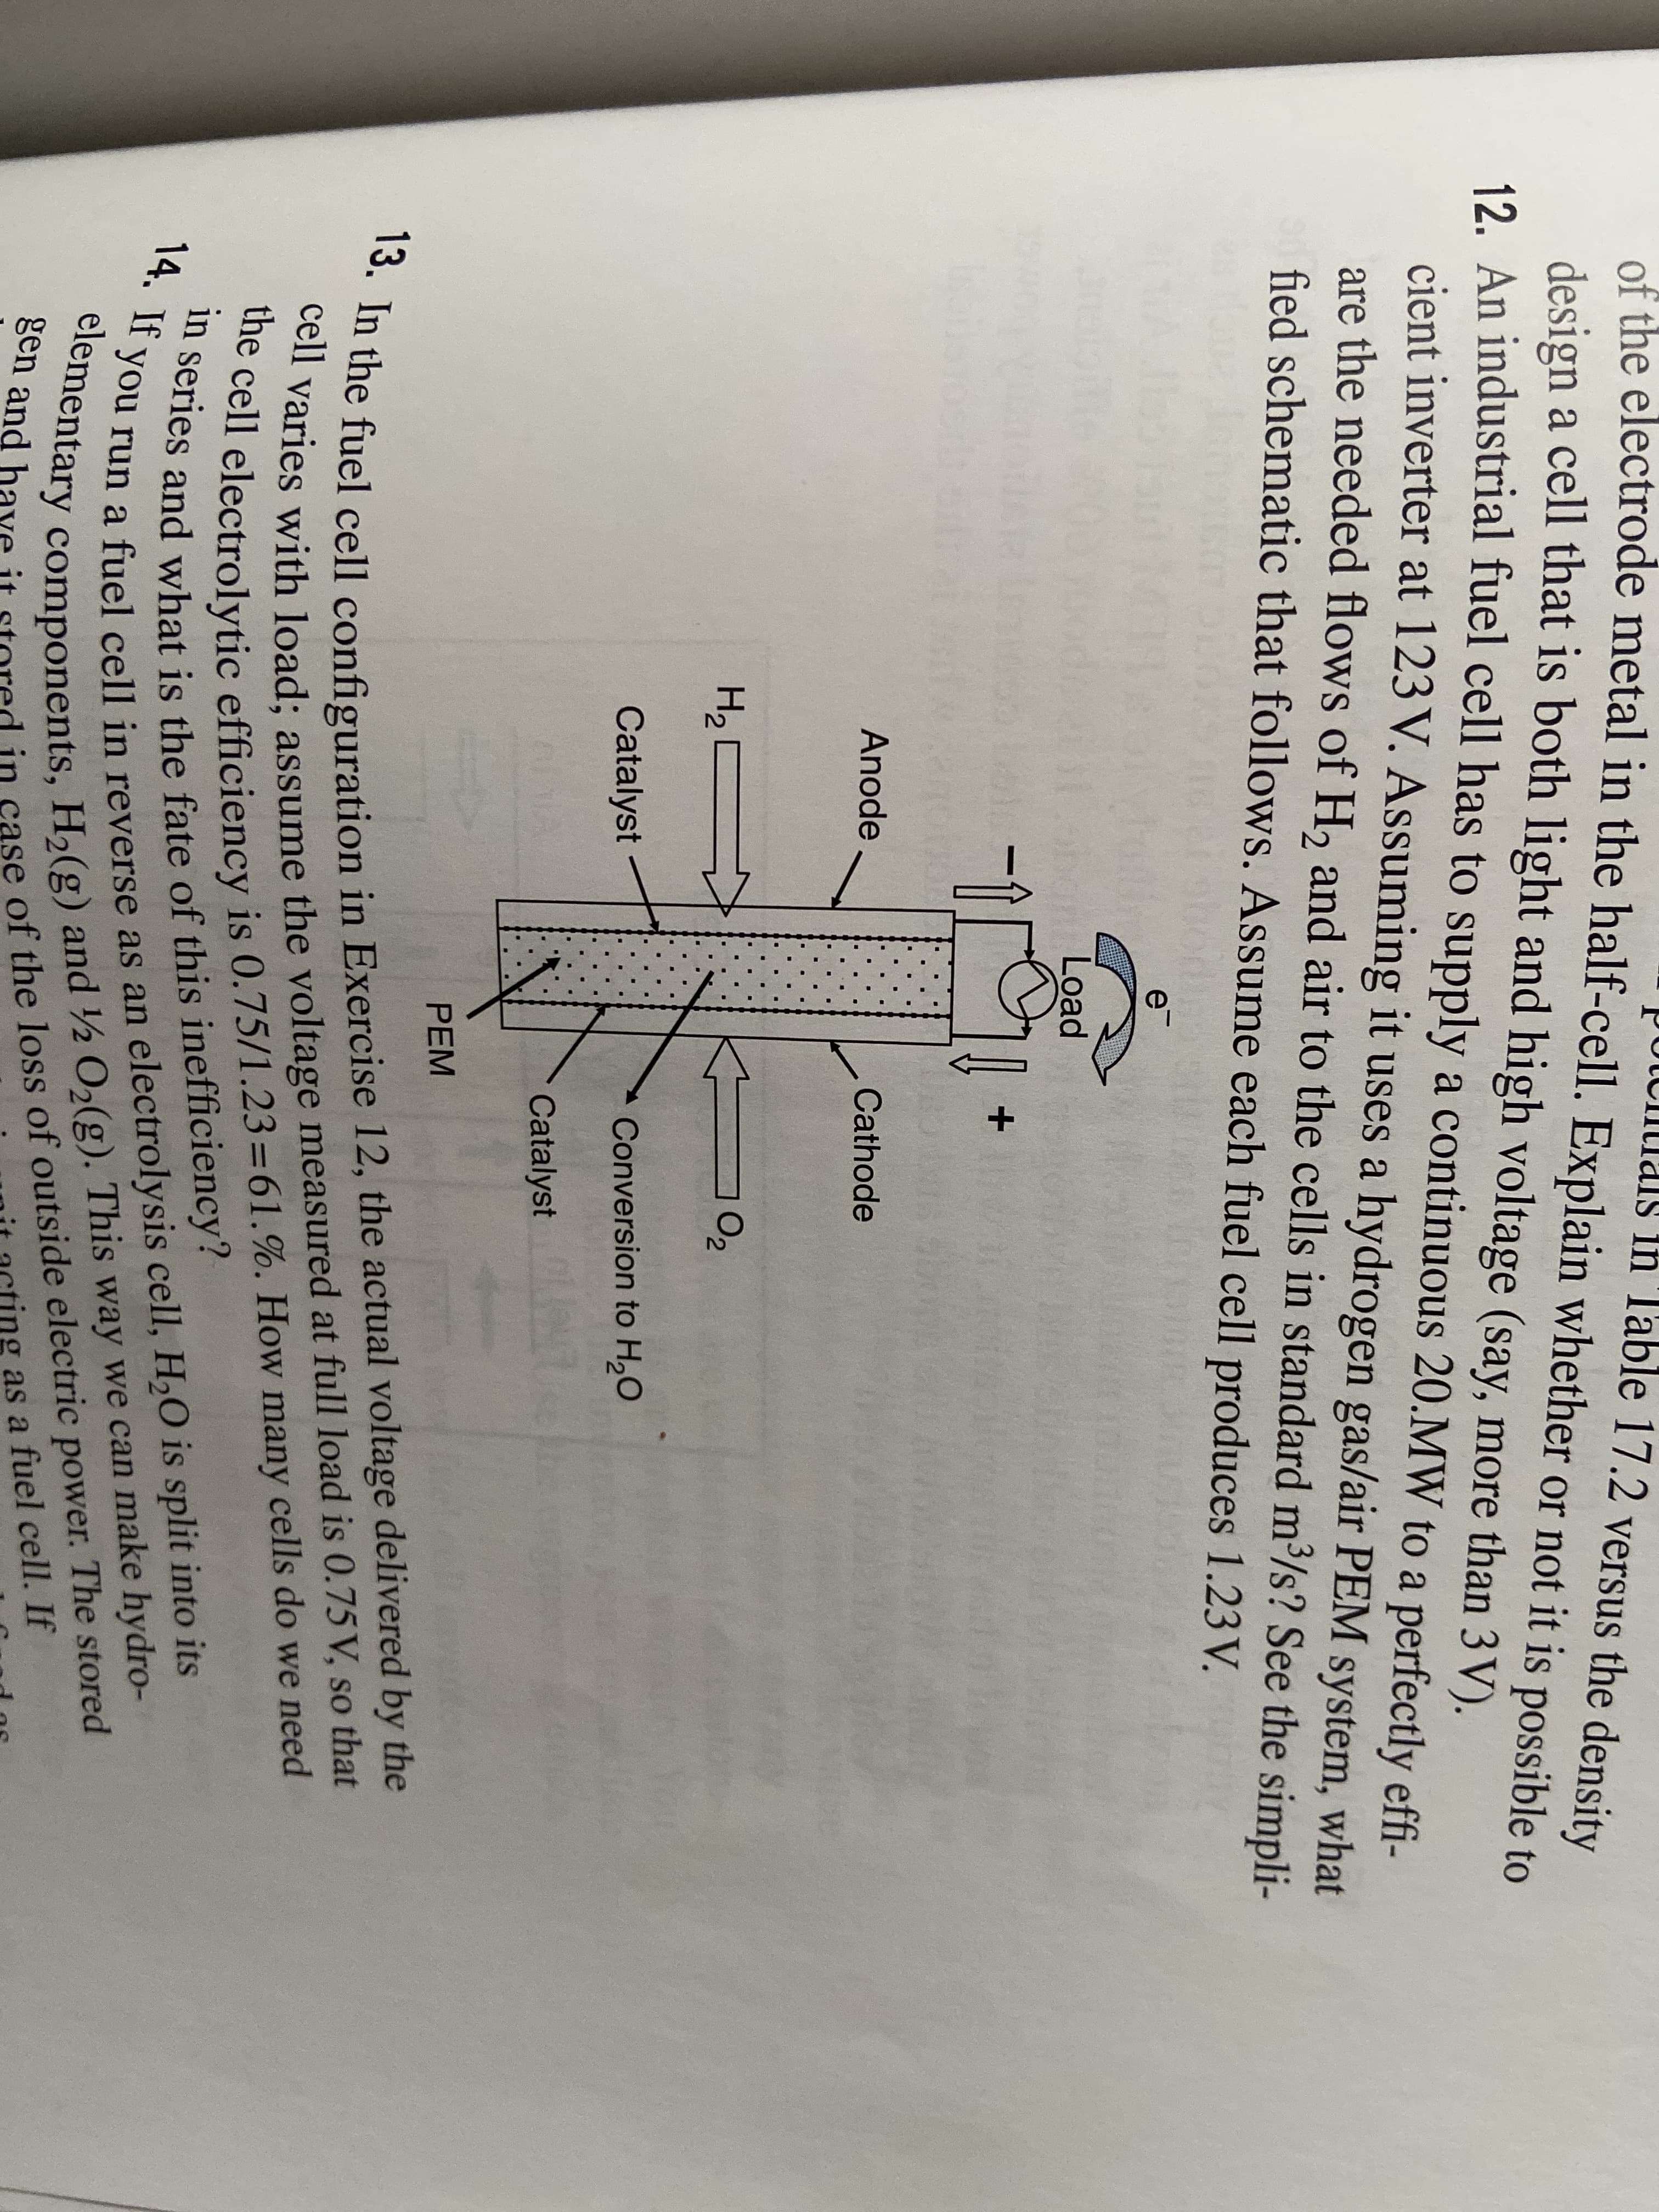 in series and what is the fate of this inefficiency?
13. In the fuel cell configuration in Exercise 12, the actual voltage delivered by the
of the electrode metal in the half-cell. Explain whether or not it is possible to
In Table 17.2 versus the density
the cell electrolytic efficiency is 0.75/1.23=61.%. How many cells do we need
cell varies with load; assume the voltage measured at full load is 0.75 V, so that
design a cell that is both light and high voltage (say, more than 3V).
12 An industrial fuel cell has to supply a continuous 20.MW to a perfectly effi-
cient inverter at 123 V. Assuming it uses a hydrogen gas/air PEM system, what
are the needed flows of H, and air to the cells in standard m³/s? See the simpli-
fied schematic that follows. Assume each fuel cell produces 1.23 V.
e
Load
Anode
Cathode
O2
Catalyst
Conversion to H,O
Catalyst
PEM
t varies with load: assume the voltage measured at full load is 0.75 V, so that
many cells do we need
elem Tun a fuel cell in reverse as an electrolysis cell, H,O is split into its
gen tary components, Ha(g) and ½ O,(g). This way we can make hydro-
it acting as a fuel cell. If
14. If
das
